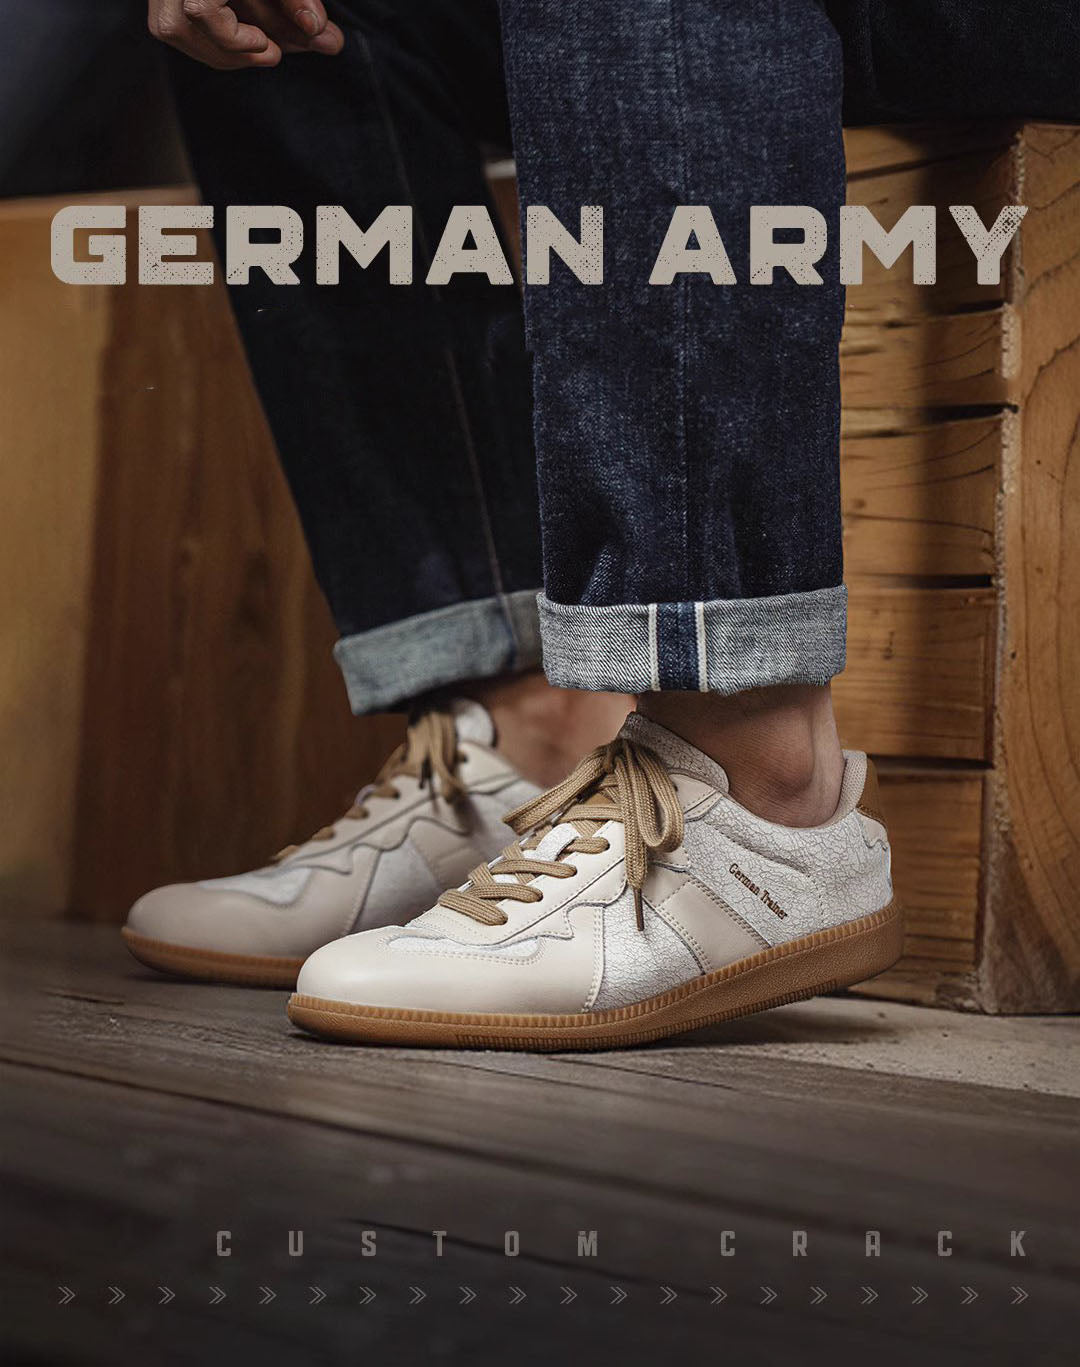 German Army Retro Cracked Moral White Versatile Men's Casual Shoes